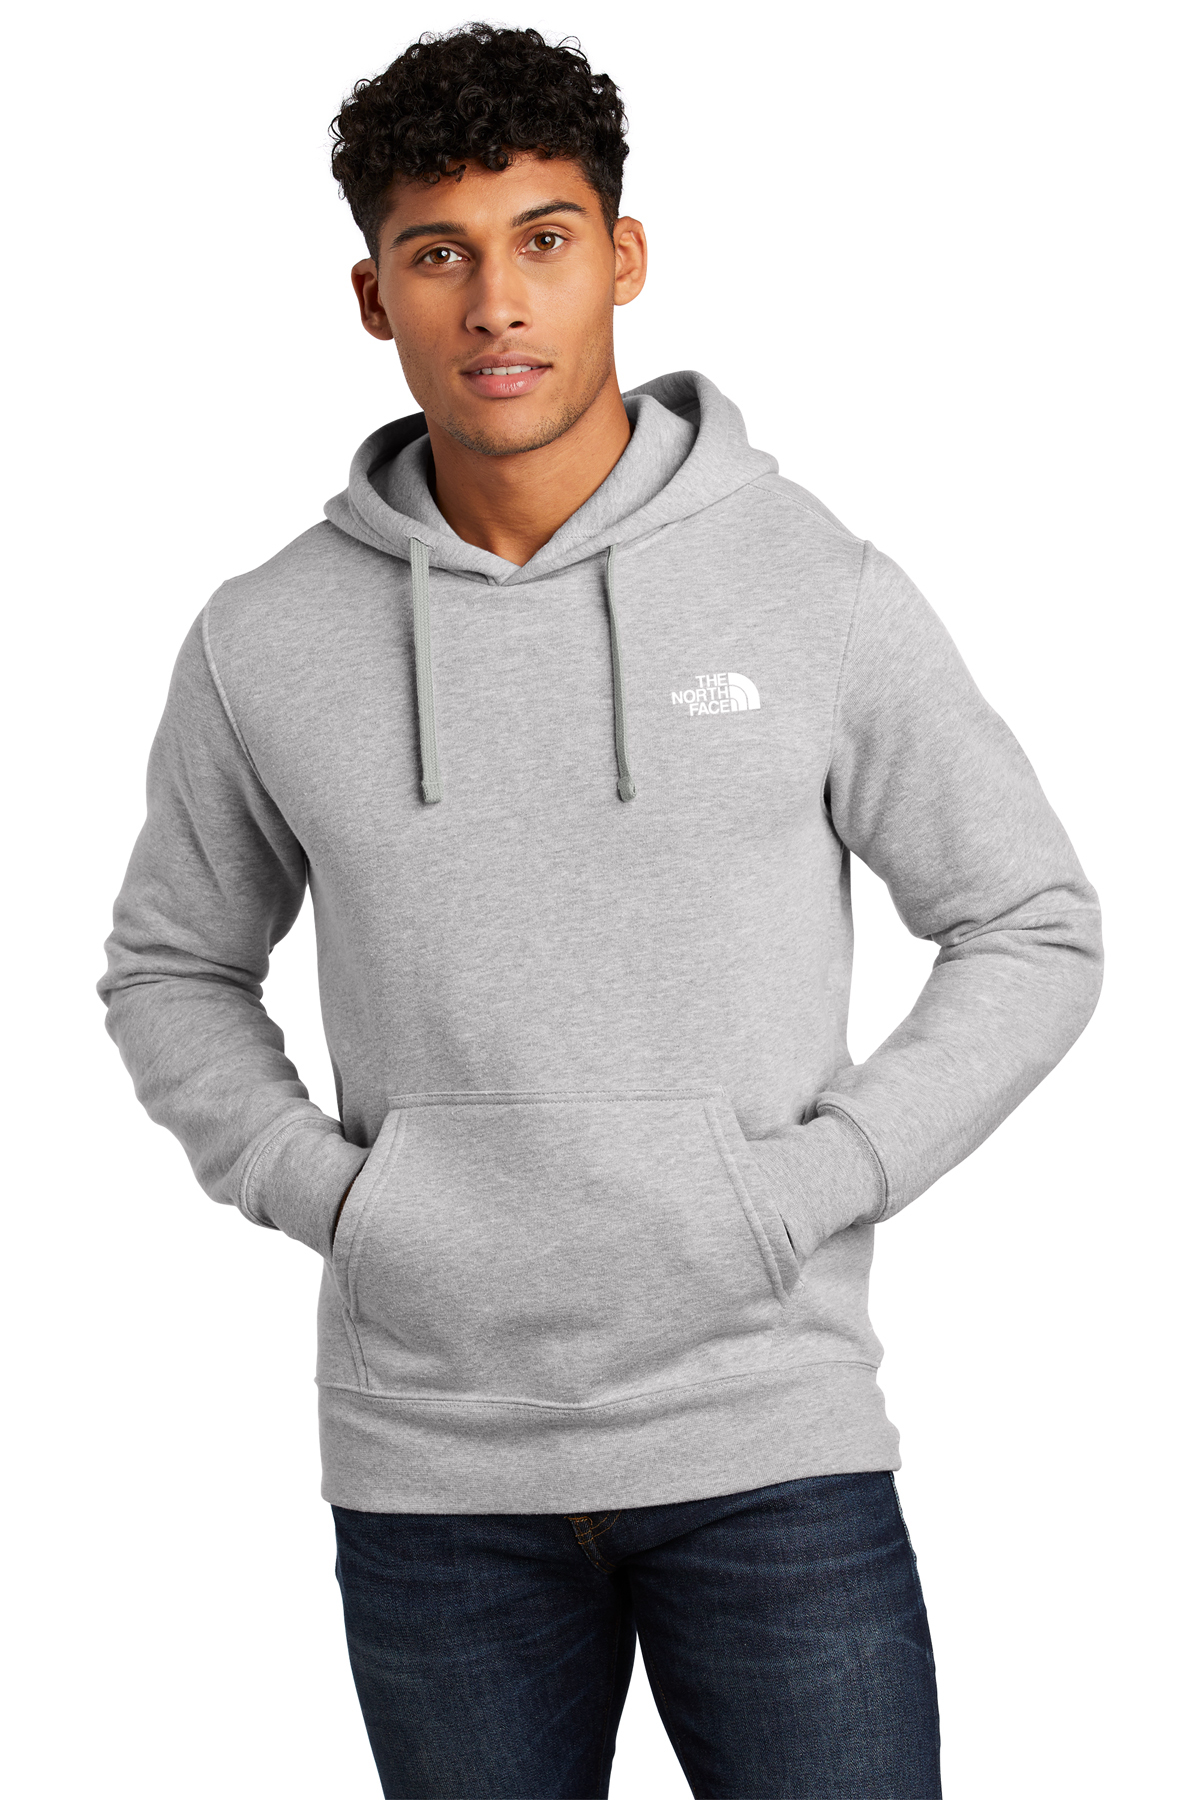 The North Face nf0a7v9b Pullover Sweatshirt